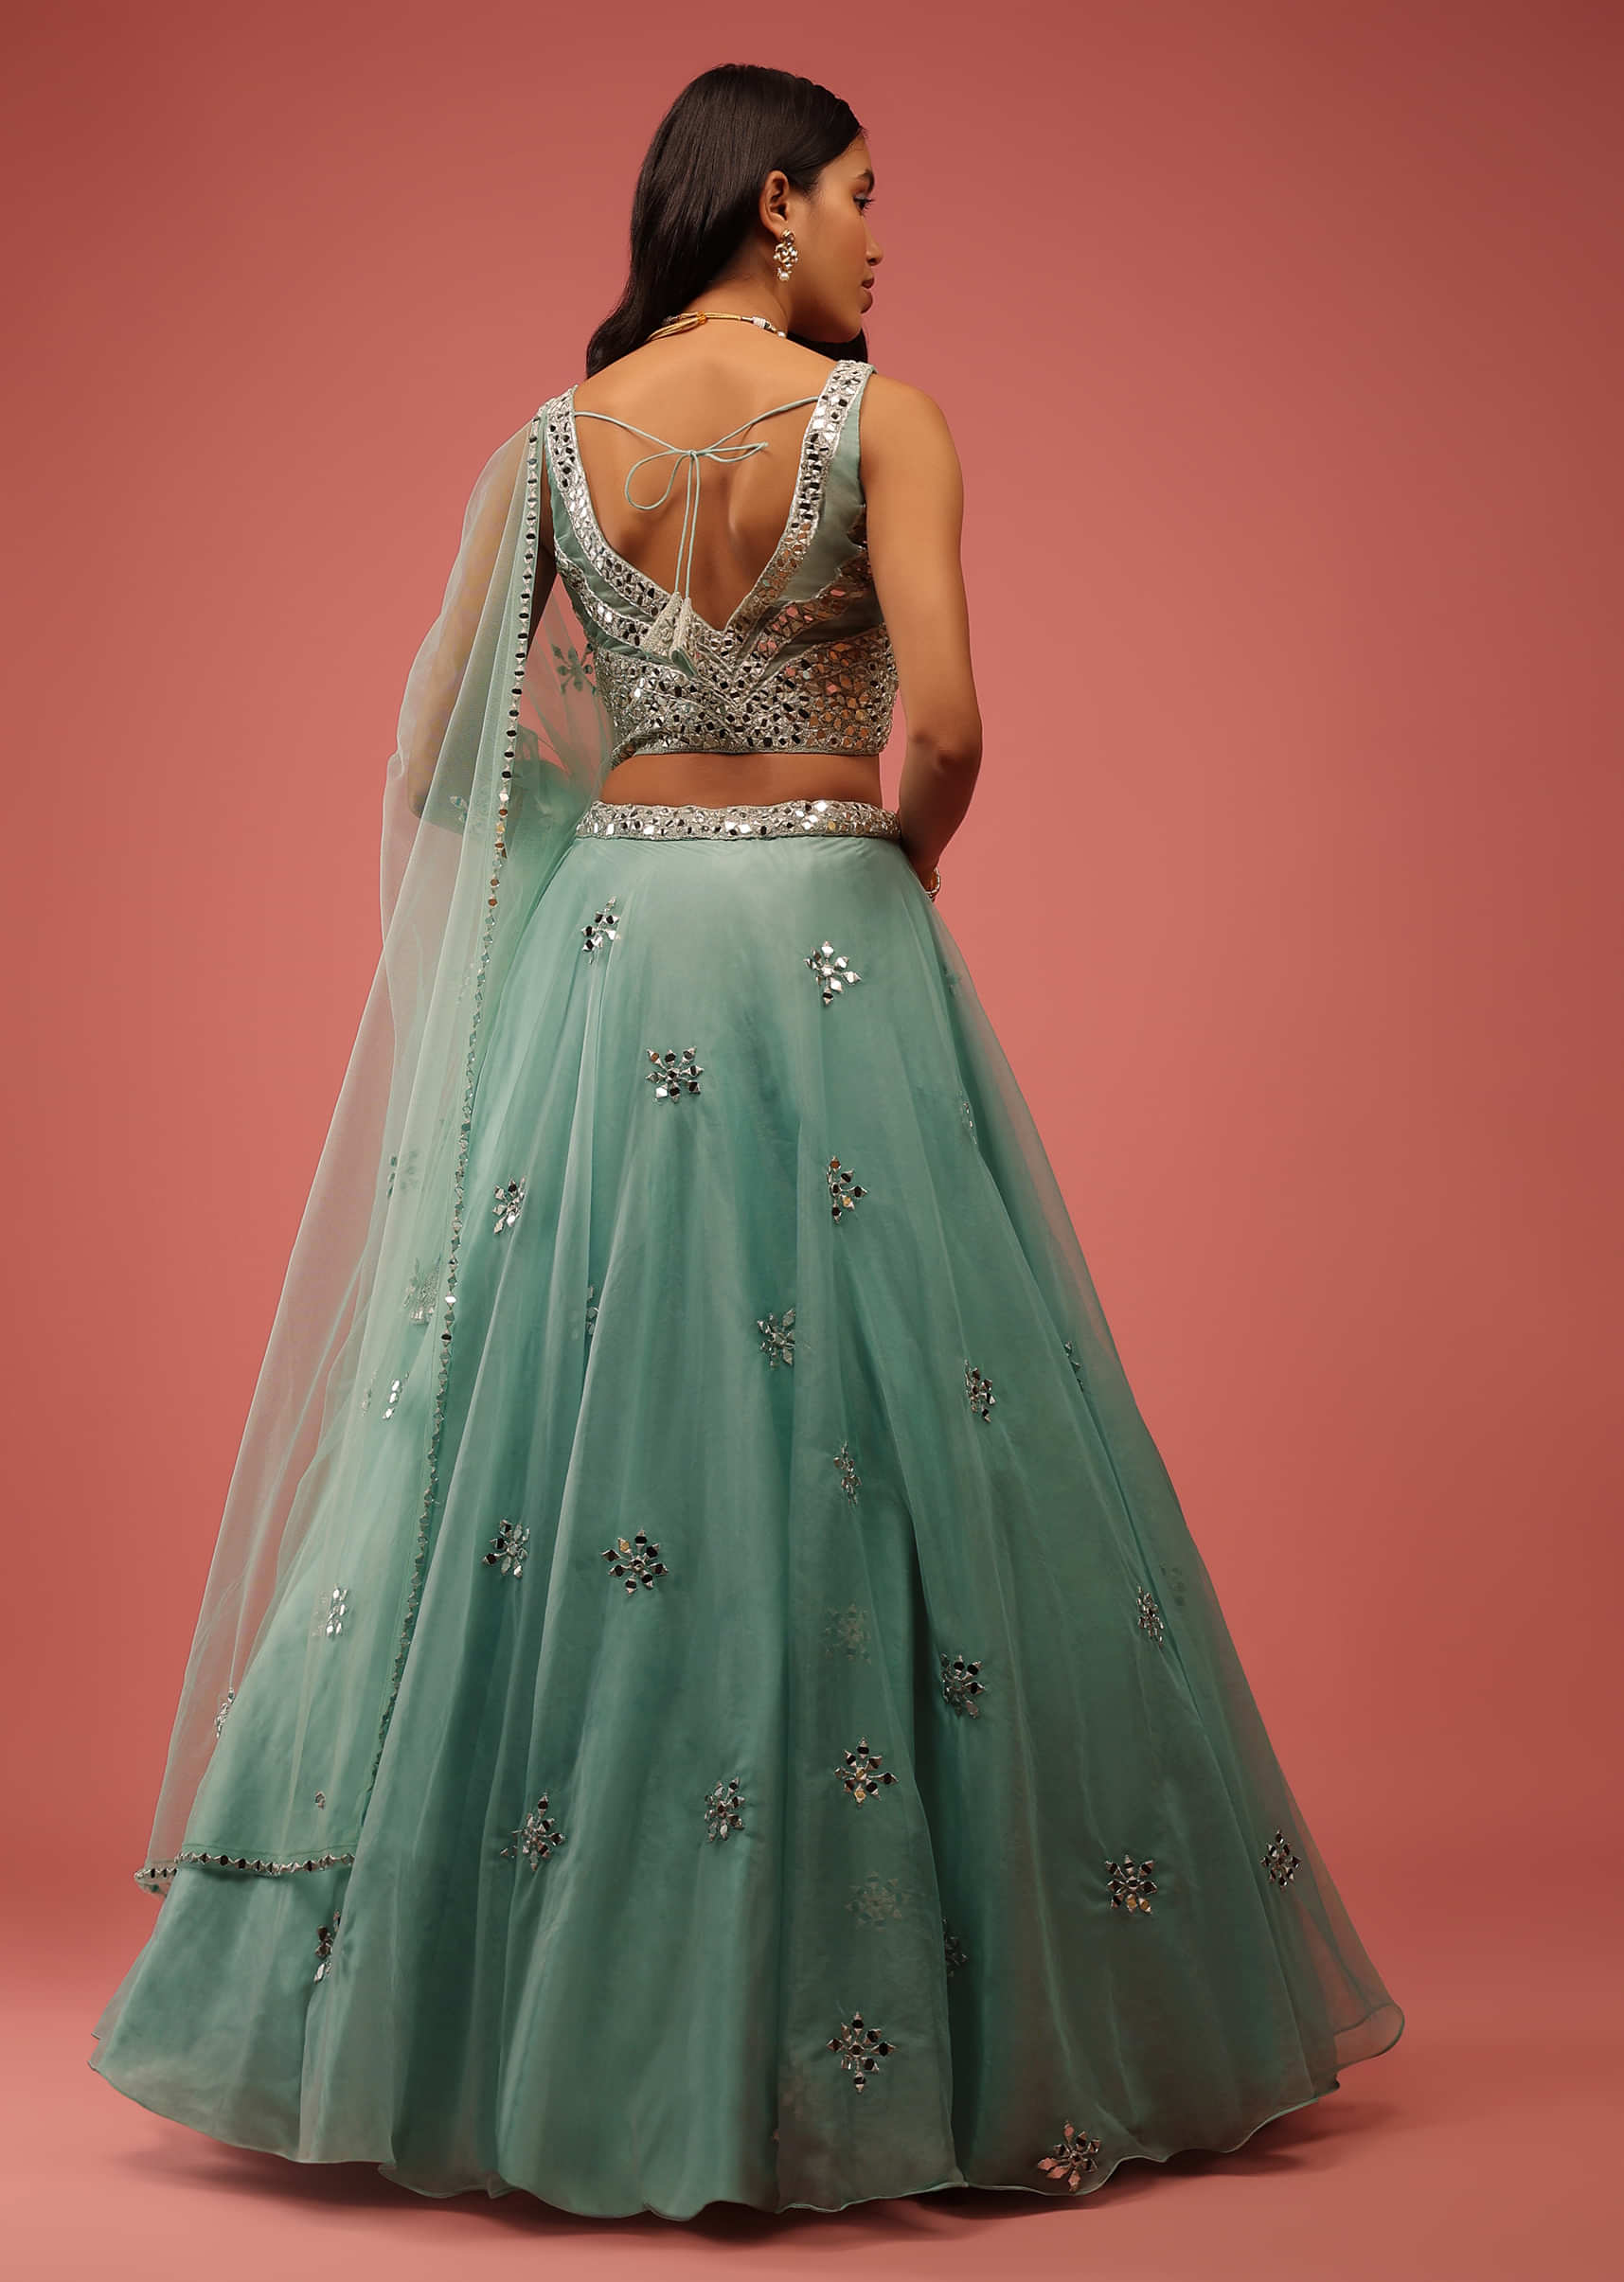 Sea Green Lehenga In Organza With A Heavily Embroidered Crop Top In Mirror Work